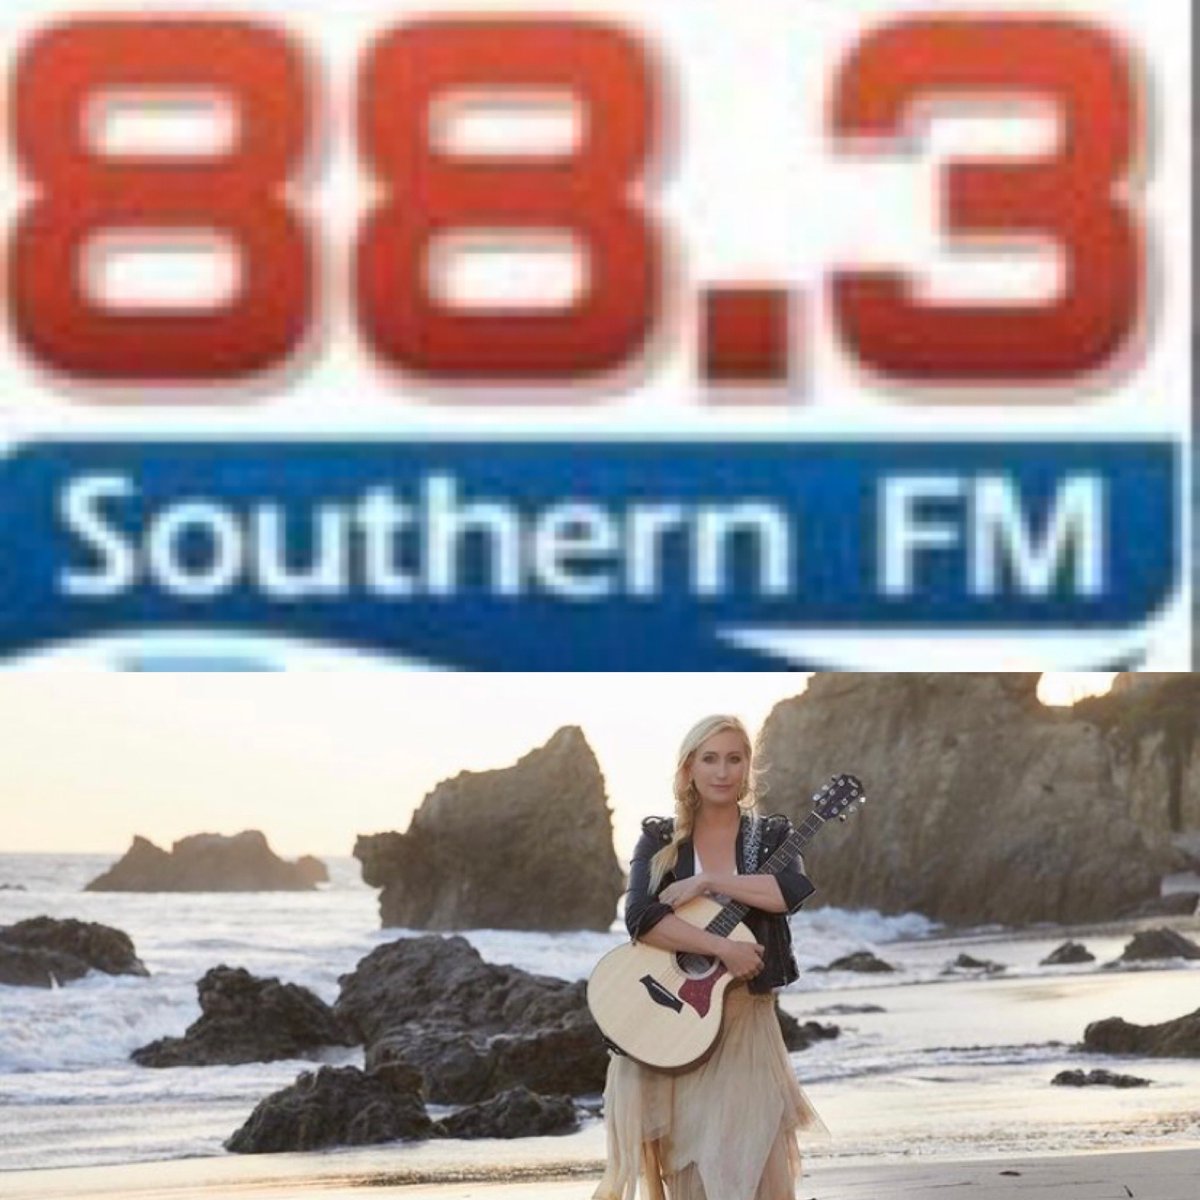 Looking forward to chatting with Clinton on @southern_fm today on the “Breaking Barriers” show. Really appreciate the opportunity and for them playing ‘Oceanside’! 2:30pmAEDT (4:30pmNZT) 🎧💙 southernfm.com.au Love and light to you all, Emme